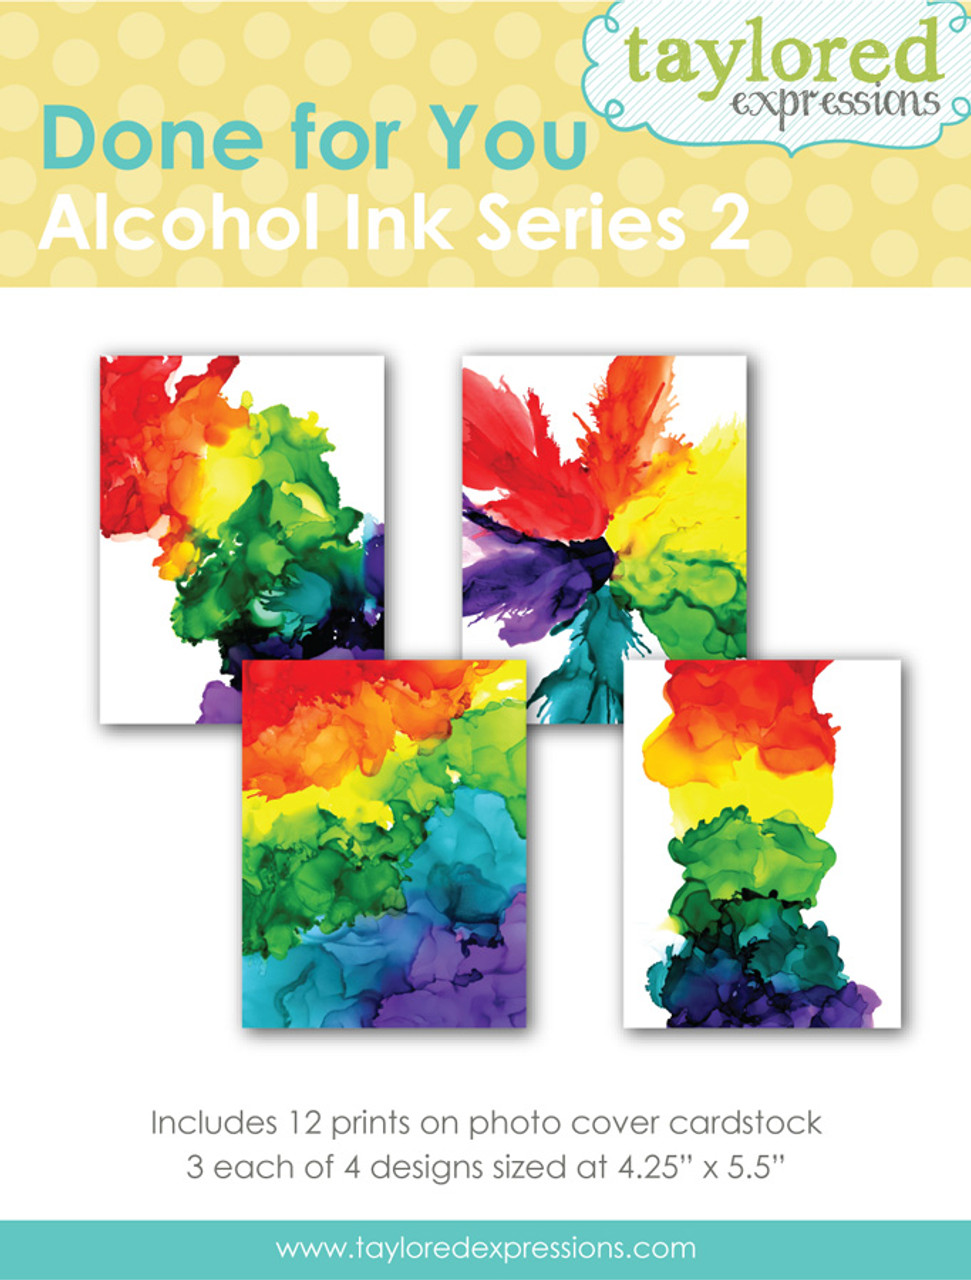 Alcohol Ink Cardstock